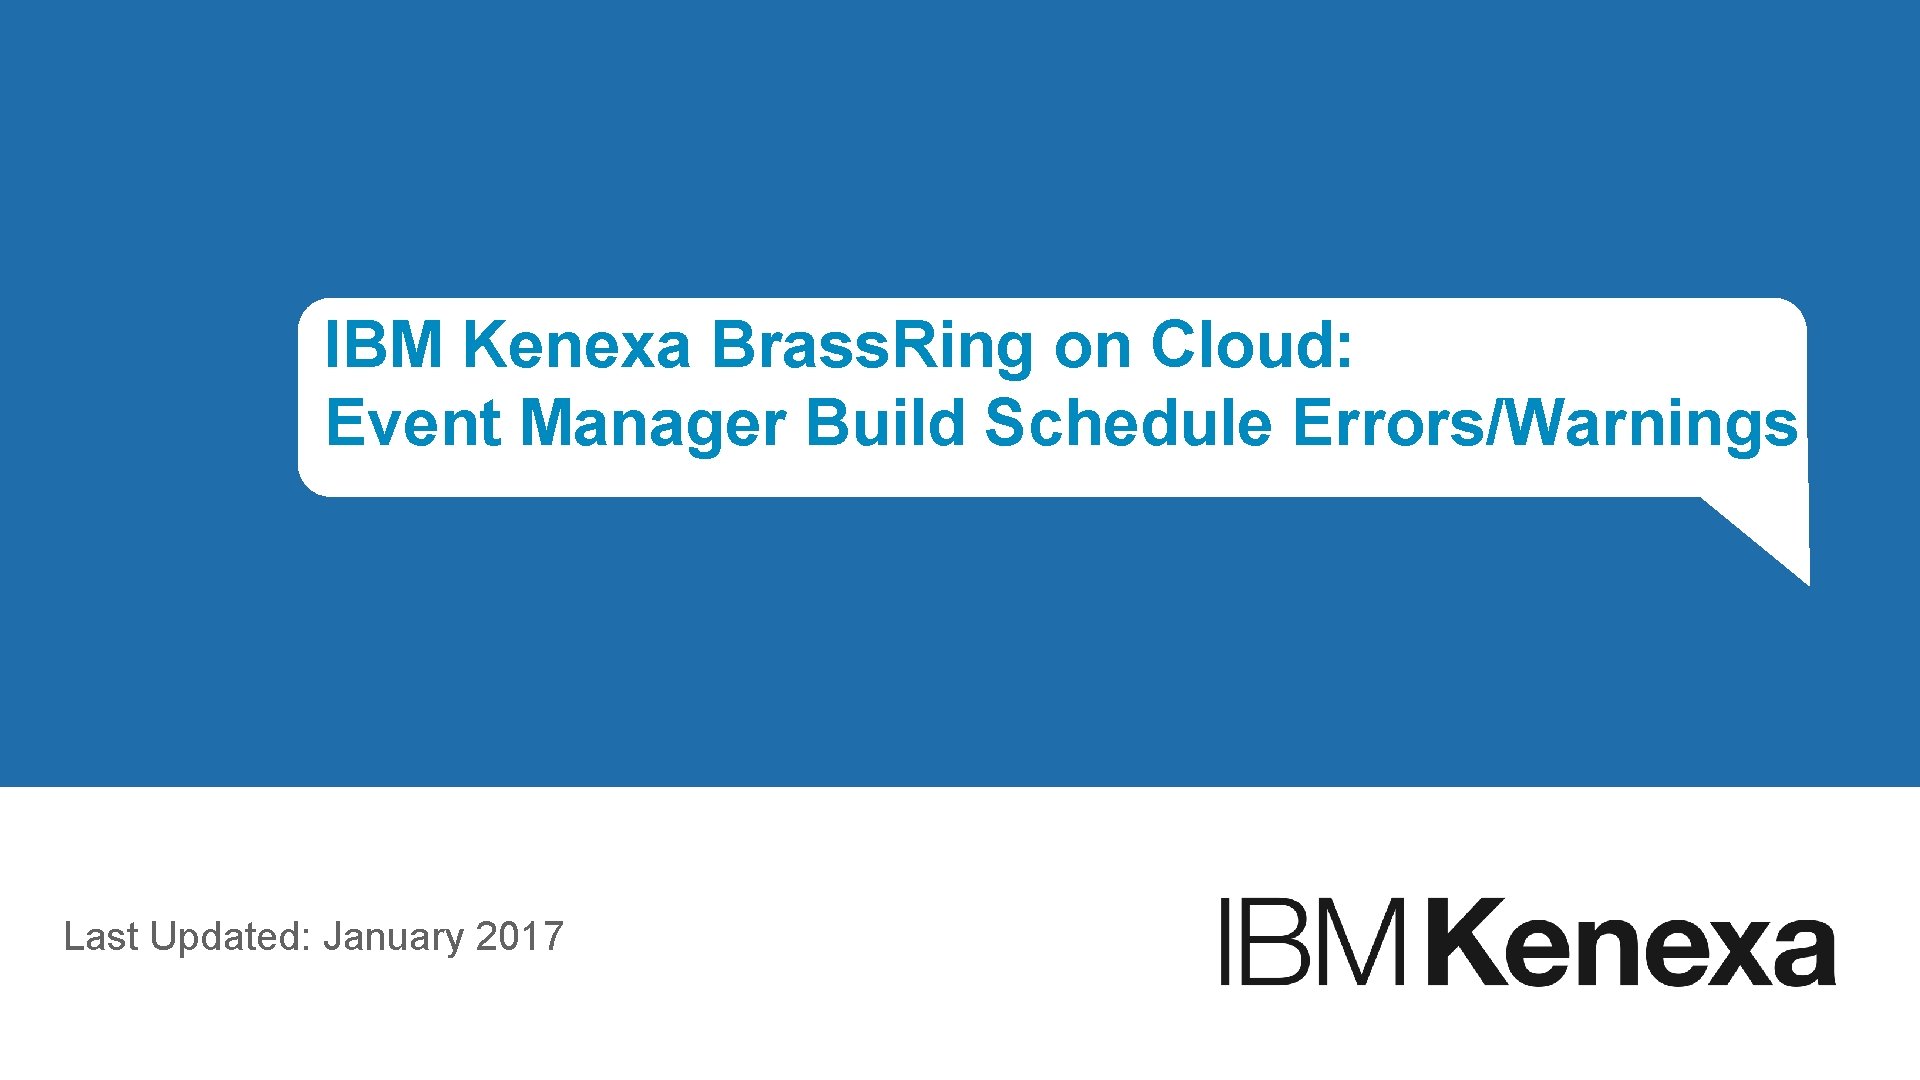 IBM Kenexa Brass. Ring on Cloud: Event Manager Build Schedule Errors/Warnings Last Updated: January